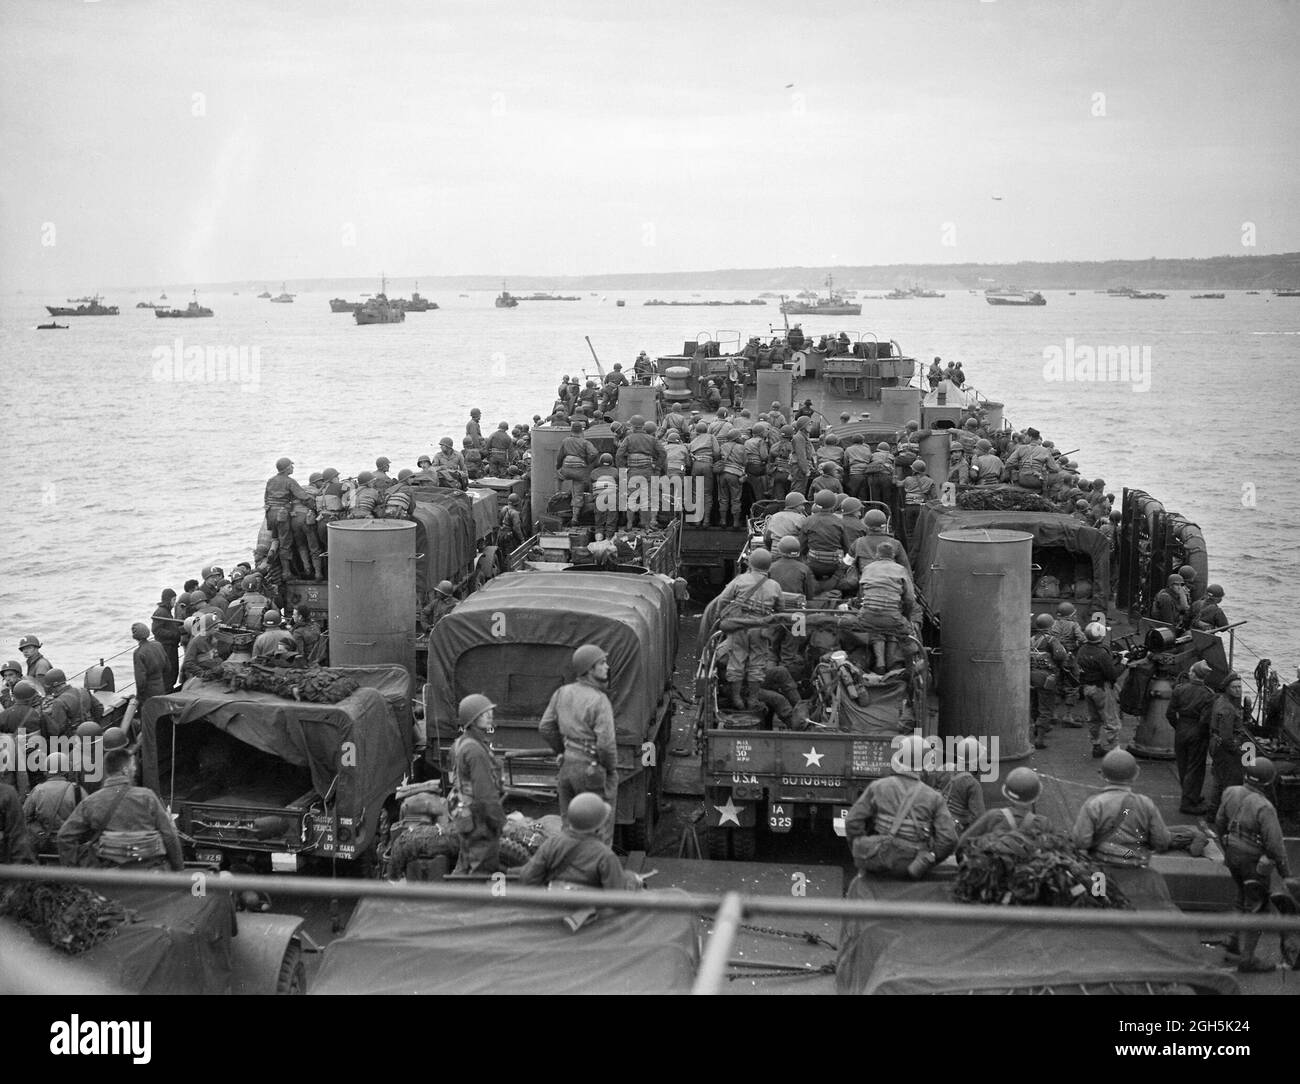 Soldiers and vehicles crammed on the deck of a Roal Navy ship at the Normandy Landings (D-Day) on the 6th June 1944 Stock Photo